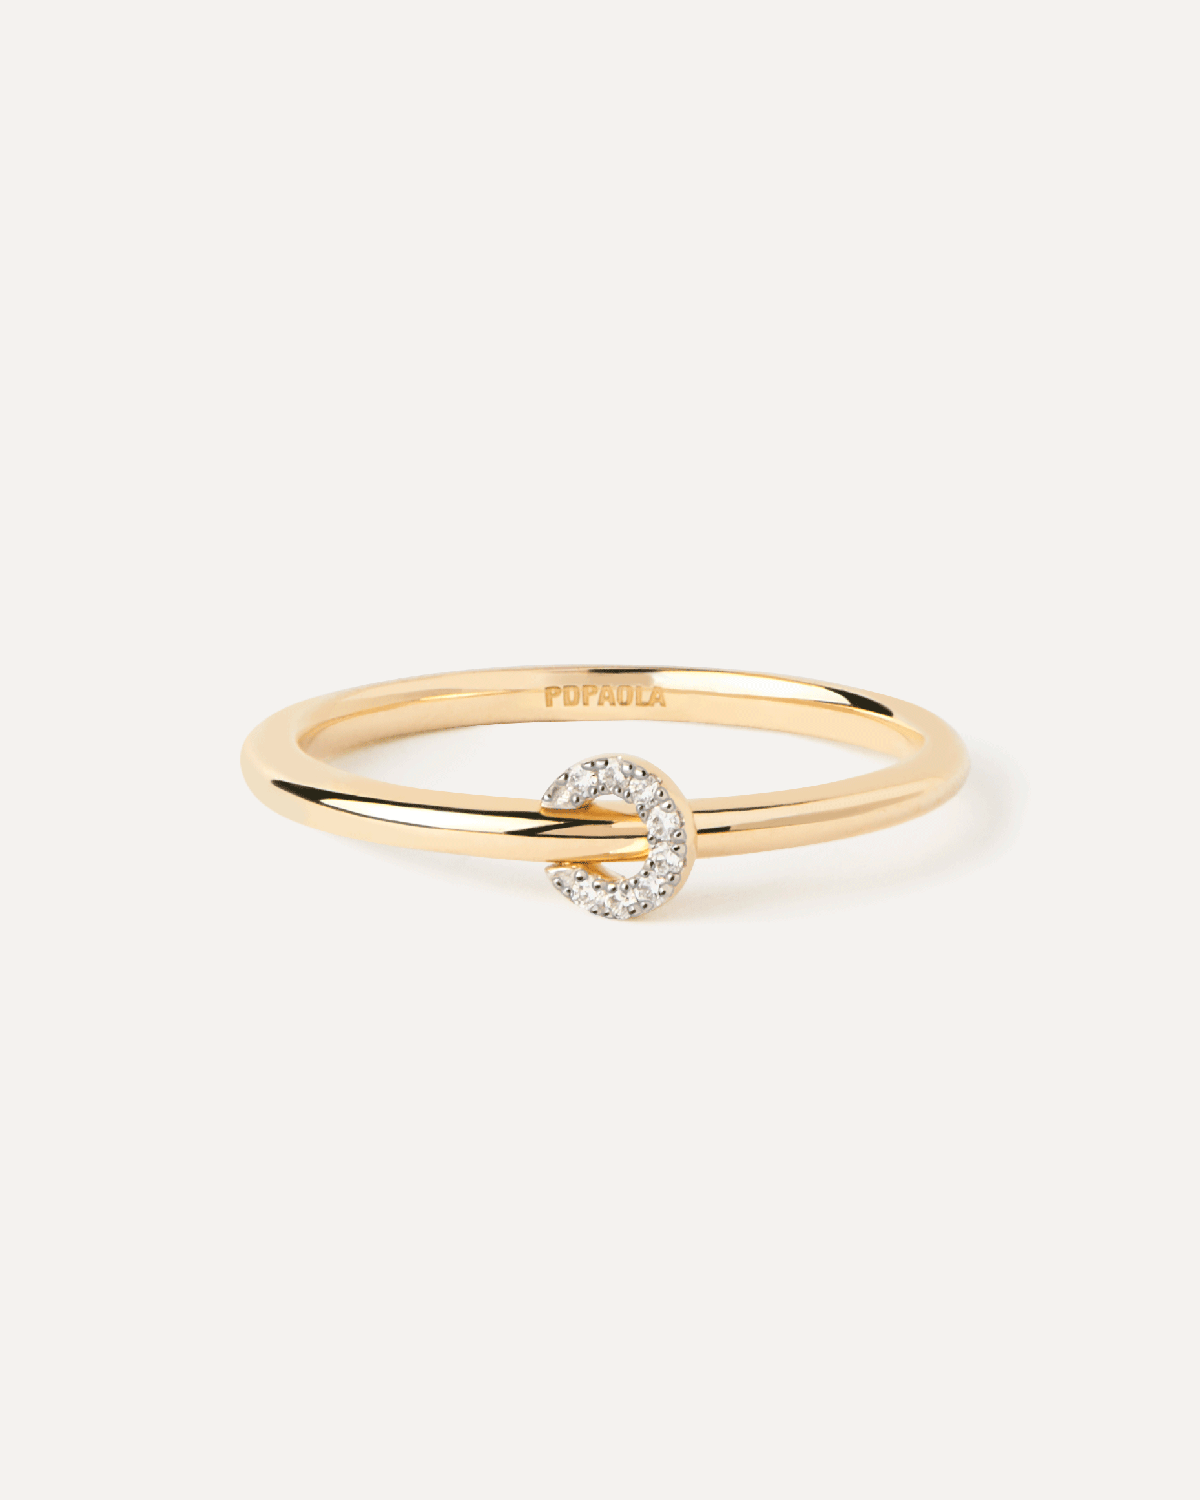 Diamonds and gold Loop ring. Solid yellow gold ring topped with a swinging circle set with lab-grown diamonds . Get the latest arrival from PDPAOLA. Place your order safely and get this Best Seller.